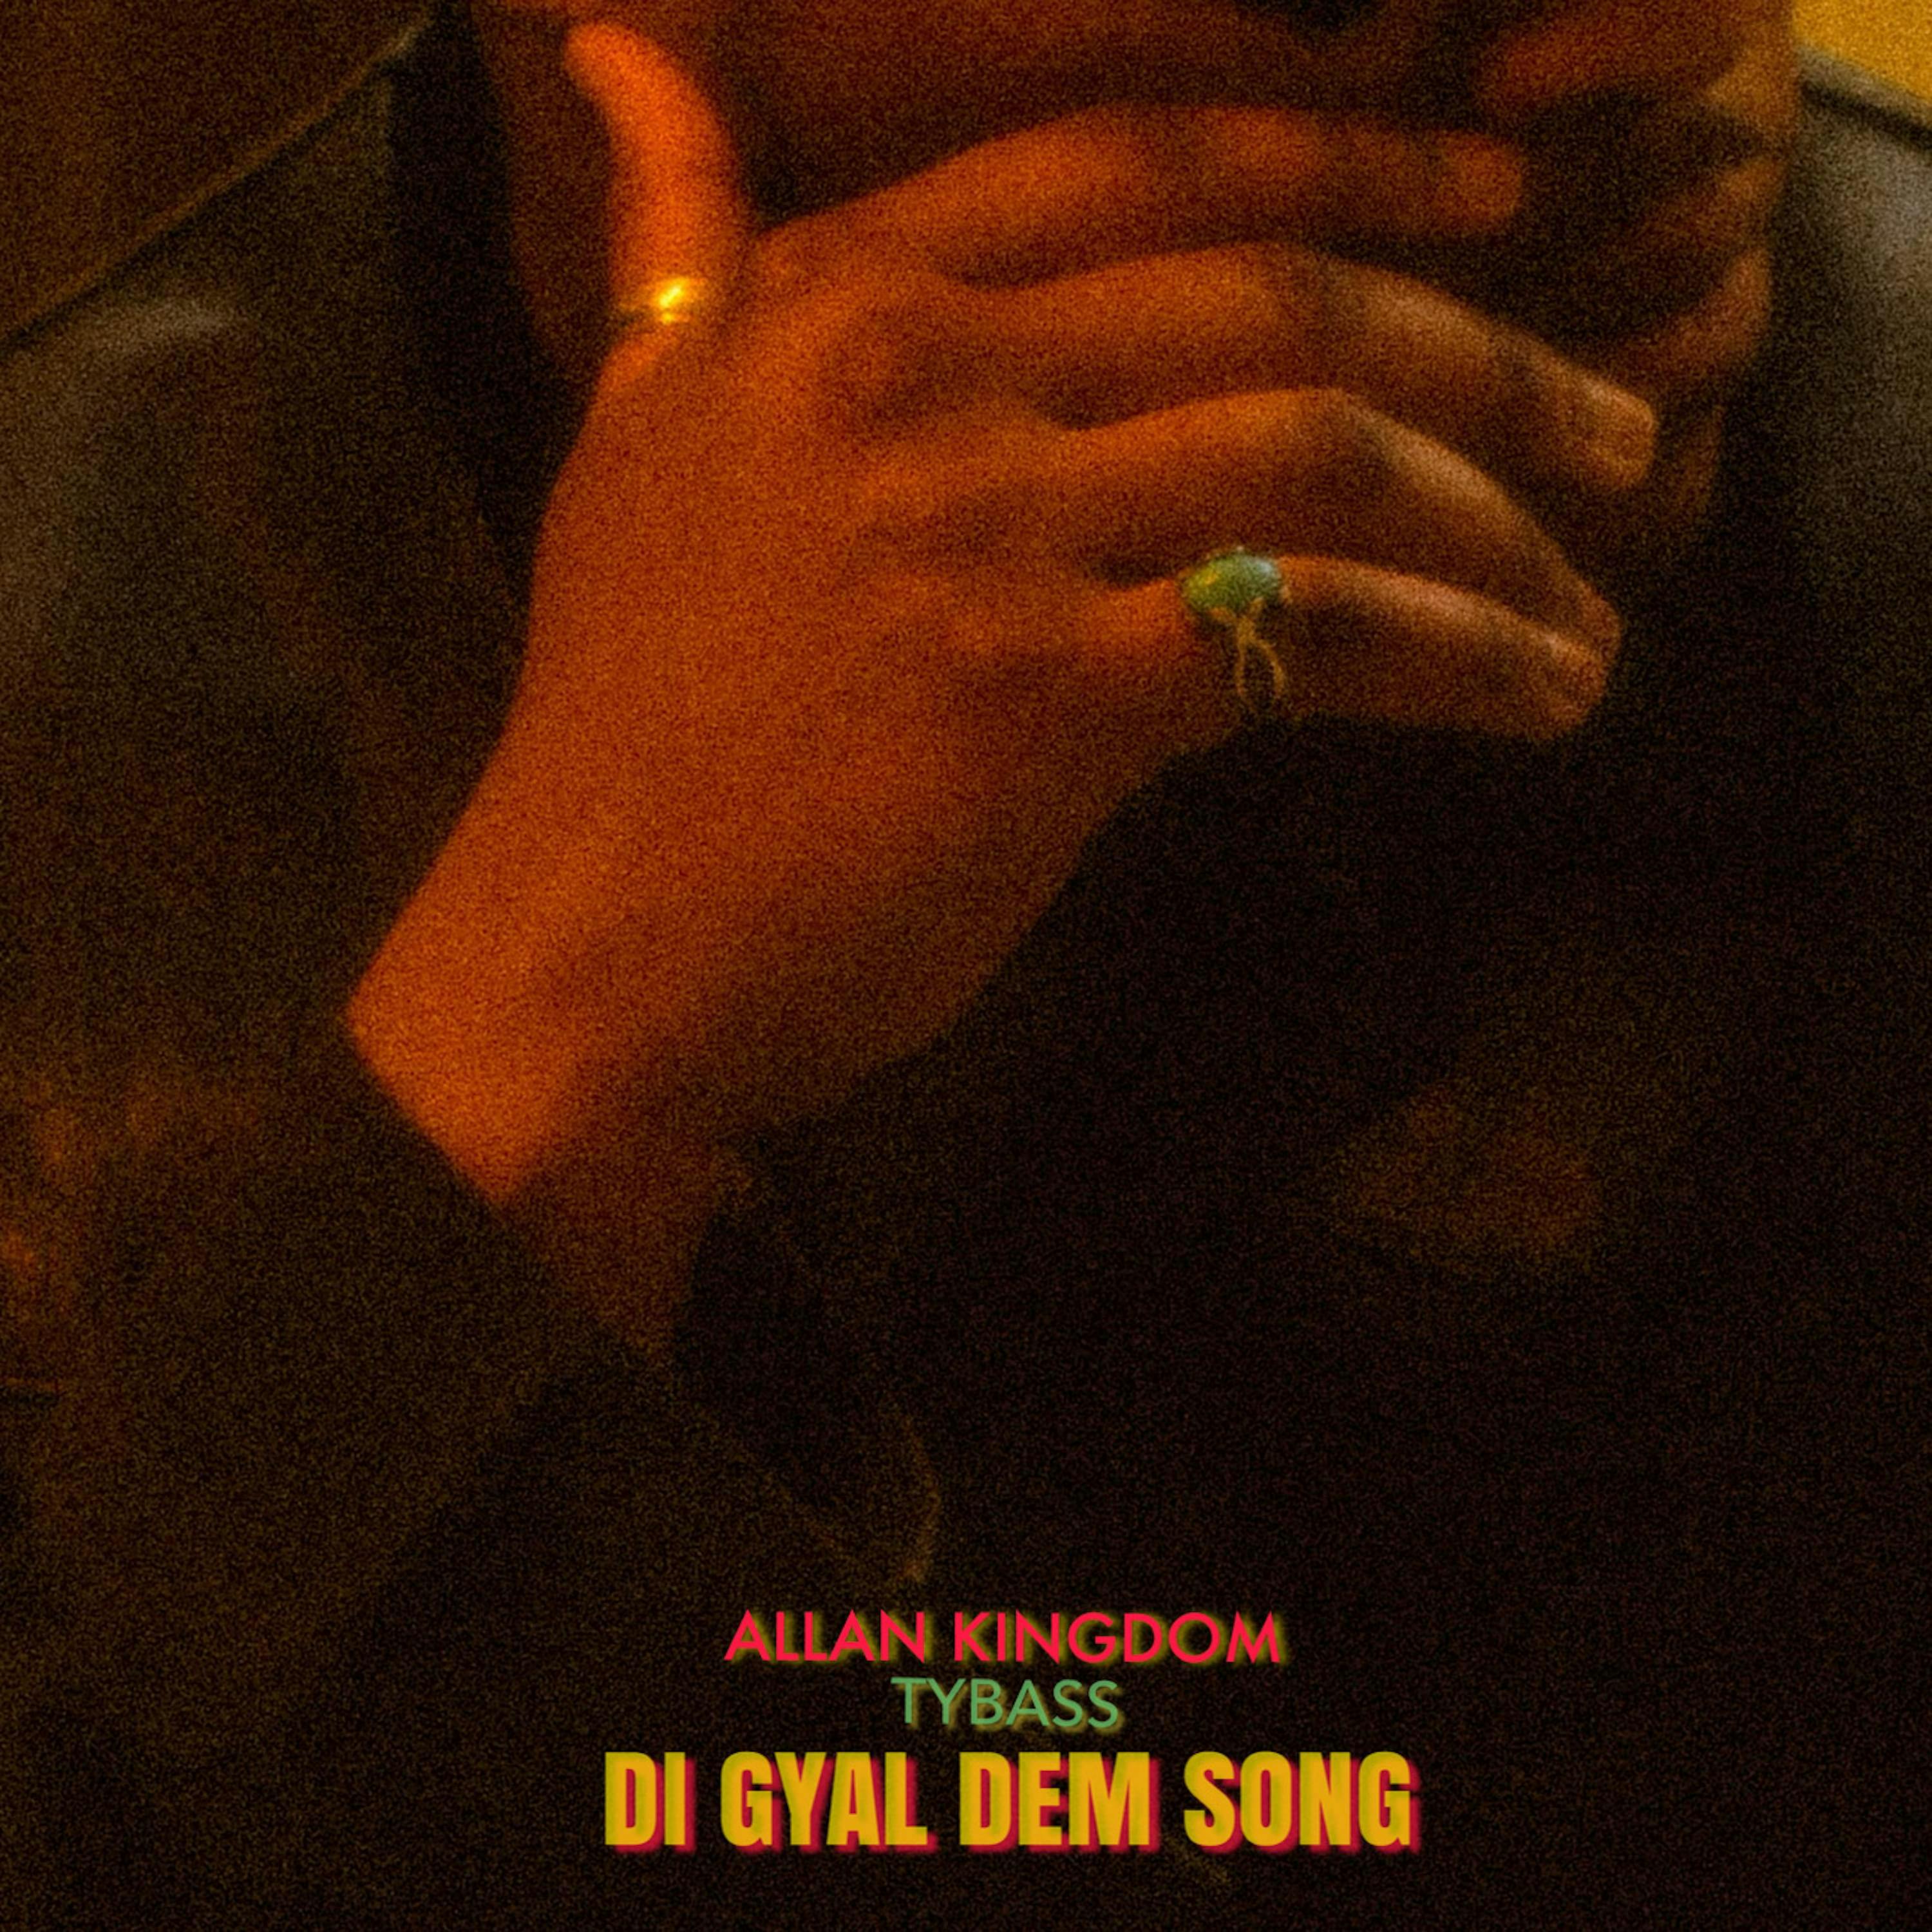 Cover art for Allan Kingdom's song: Di Gyal Dem Song